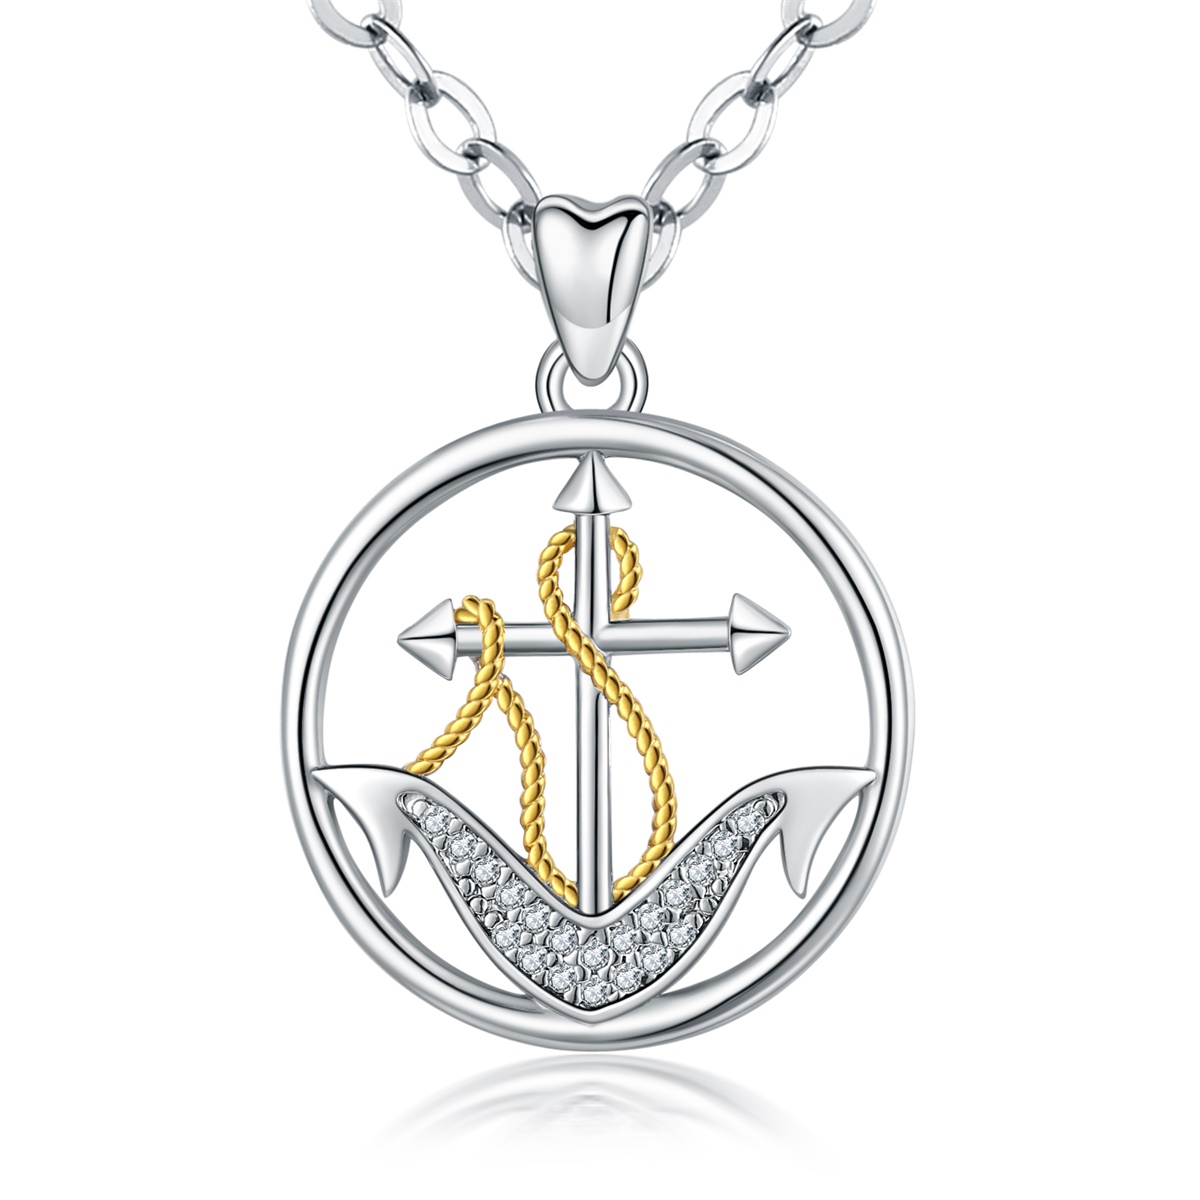 Merryshine Jewelry Rhodium Plated Sailboat Anchor Pendant Necklace for Women and Men